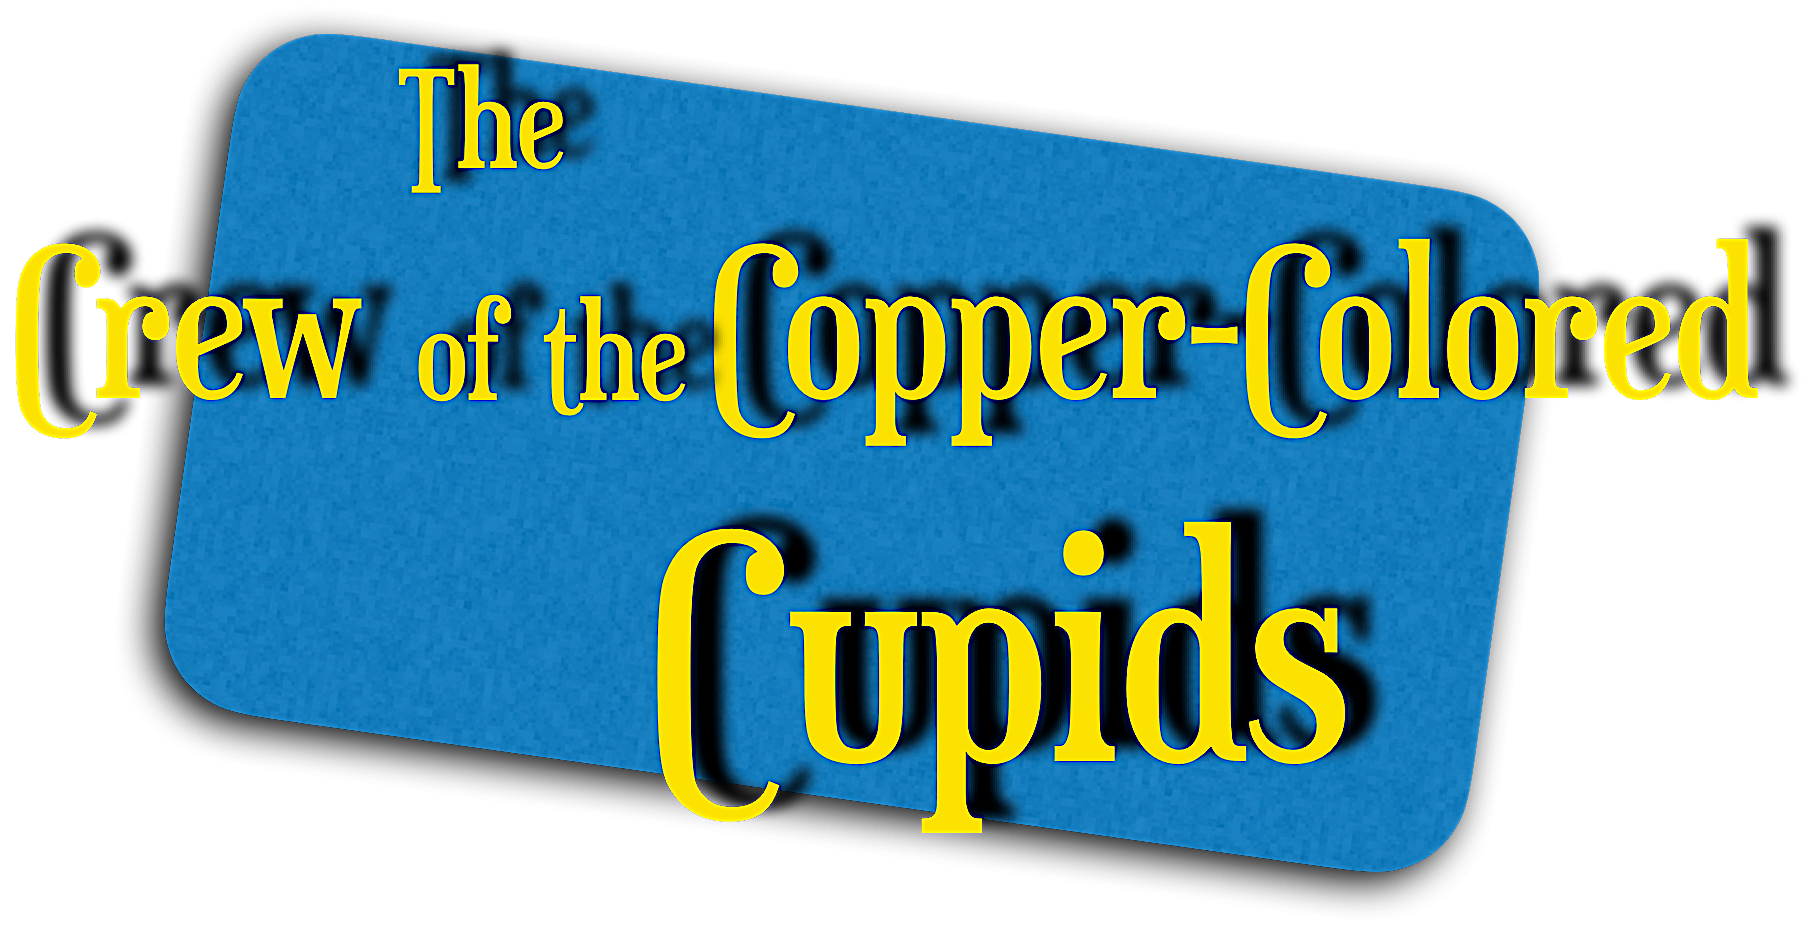 The Crew of the Copper-Colored Cupids